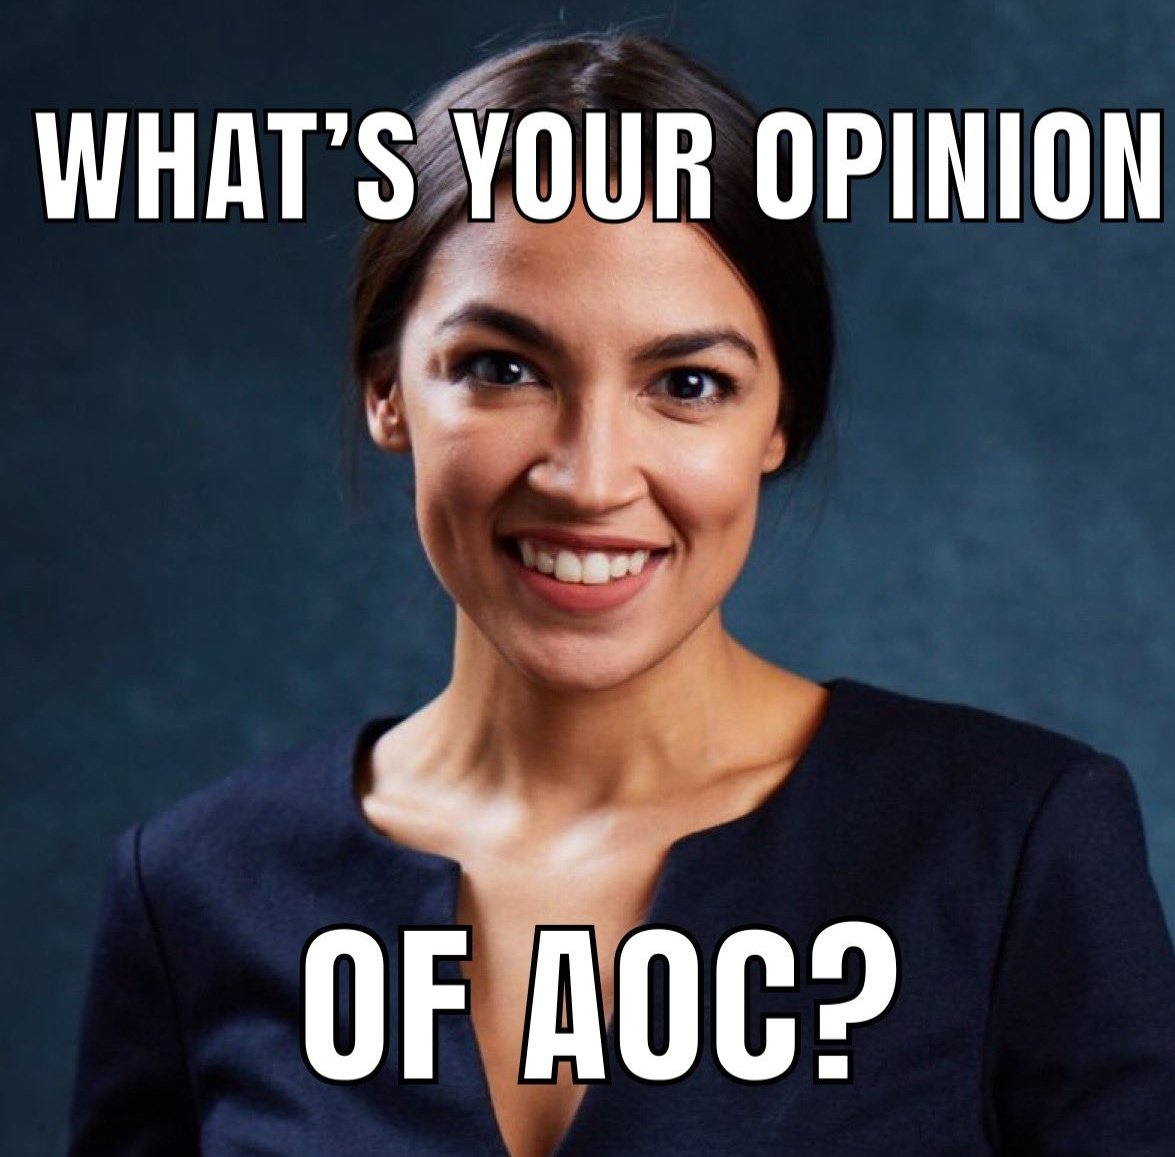 What's your opinion of AOC?